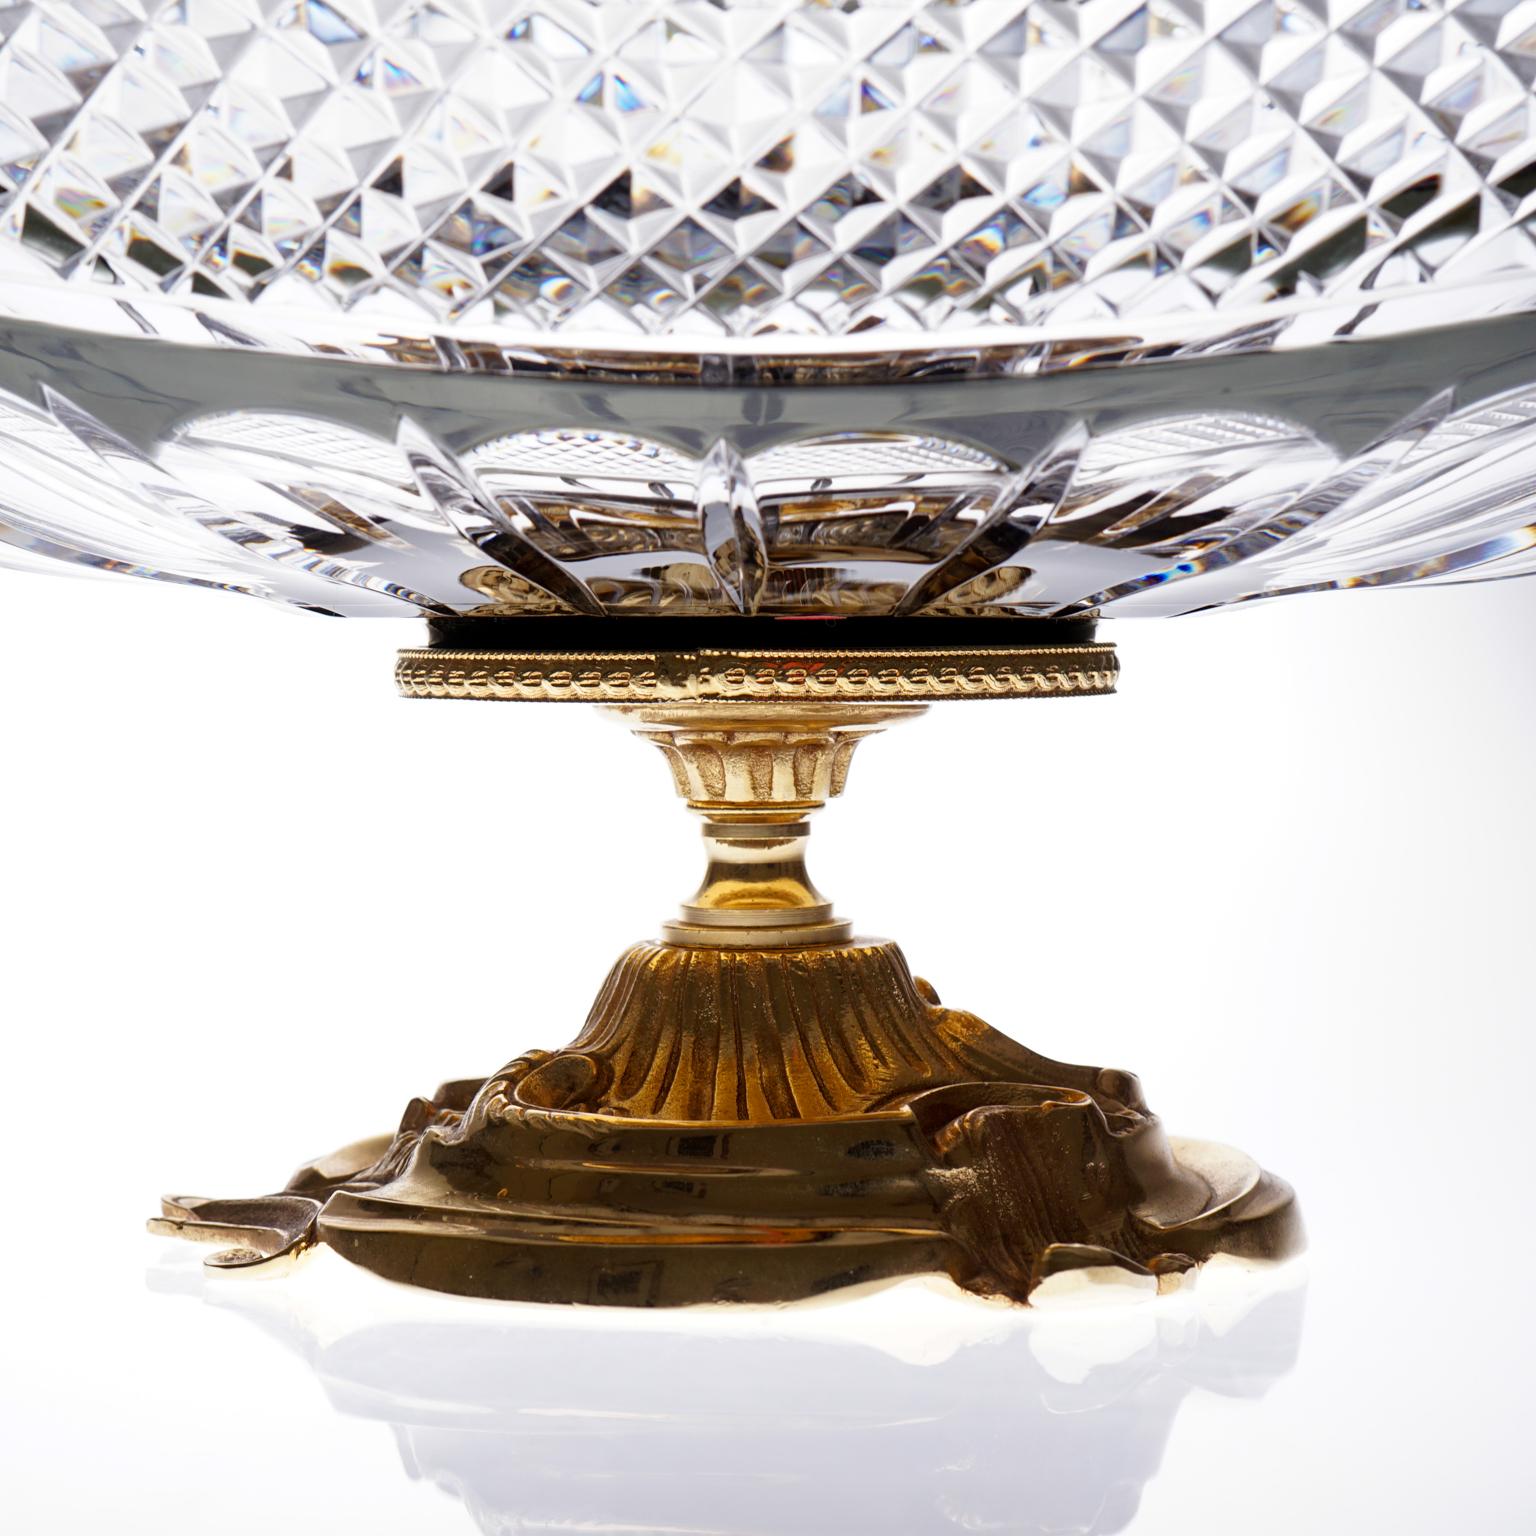 Clear crystal jardinière with bronze covered 22-carat Gold in Oriental style.

Impressive work on the 22-carat gold covered bronze. 

High quality crystal handcrafted. 

The crystal is embellished with 22-carat gold, which makes for an item of